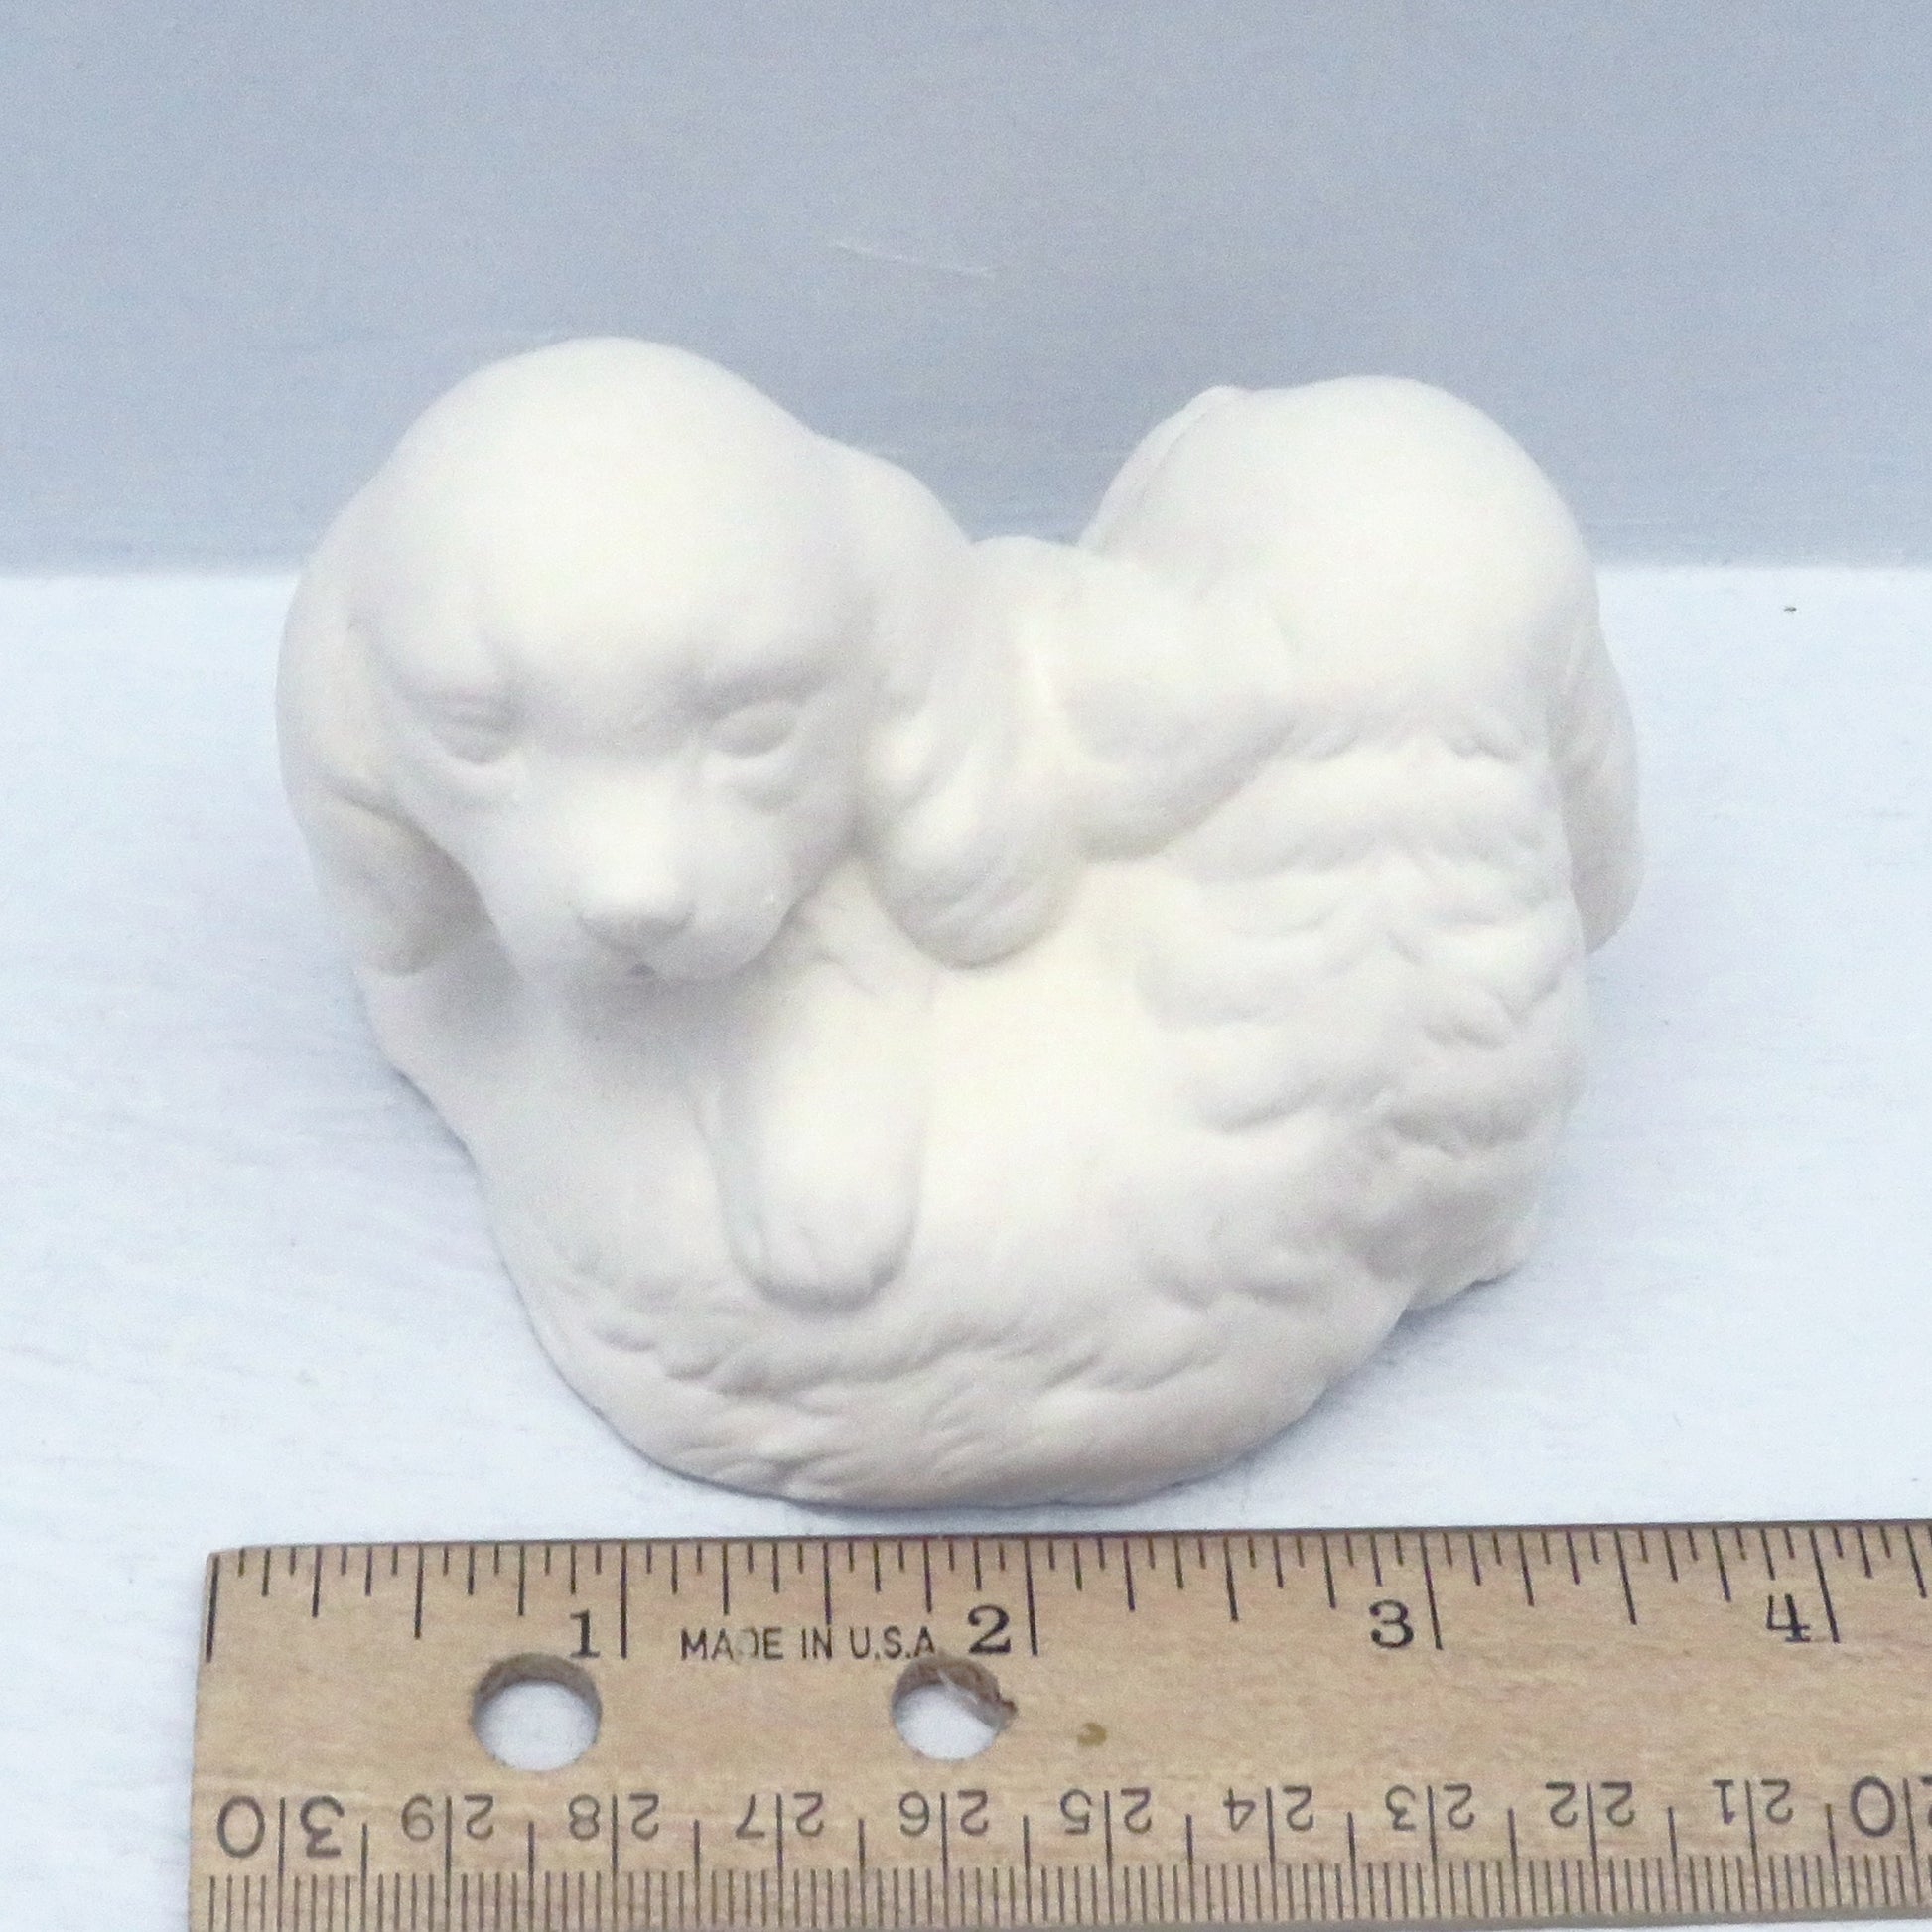 Handmade paint it yourself ceramic figurine with puppies near a ruler showing it to be approximately 3 3/4 inches wide